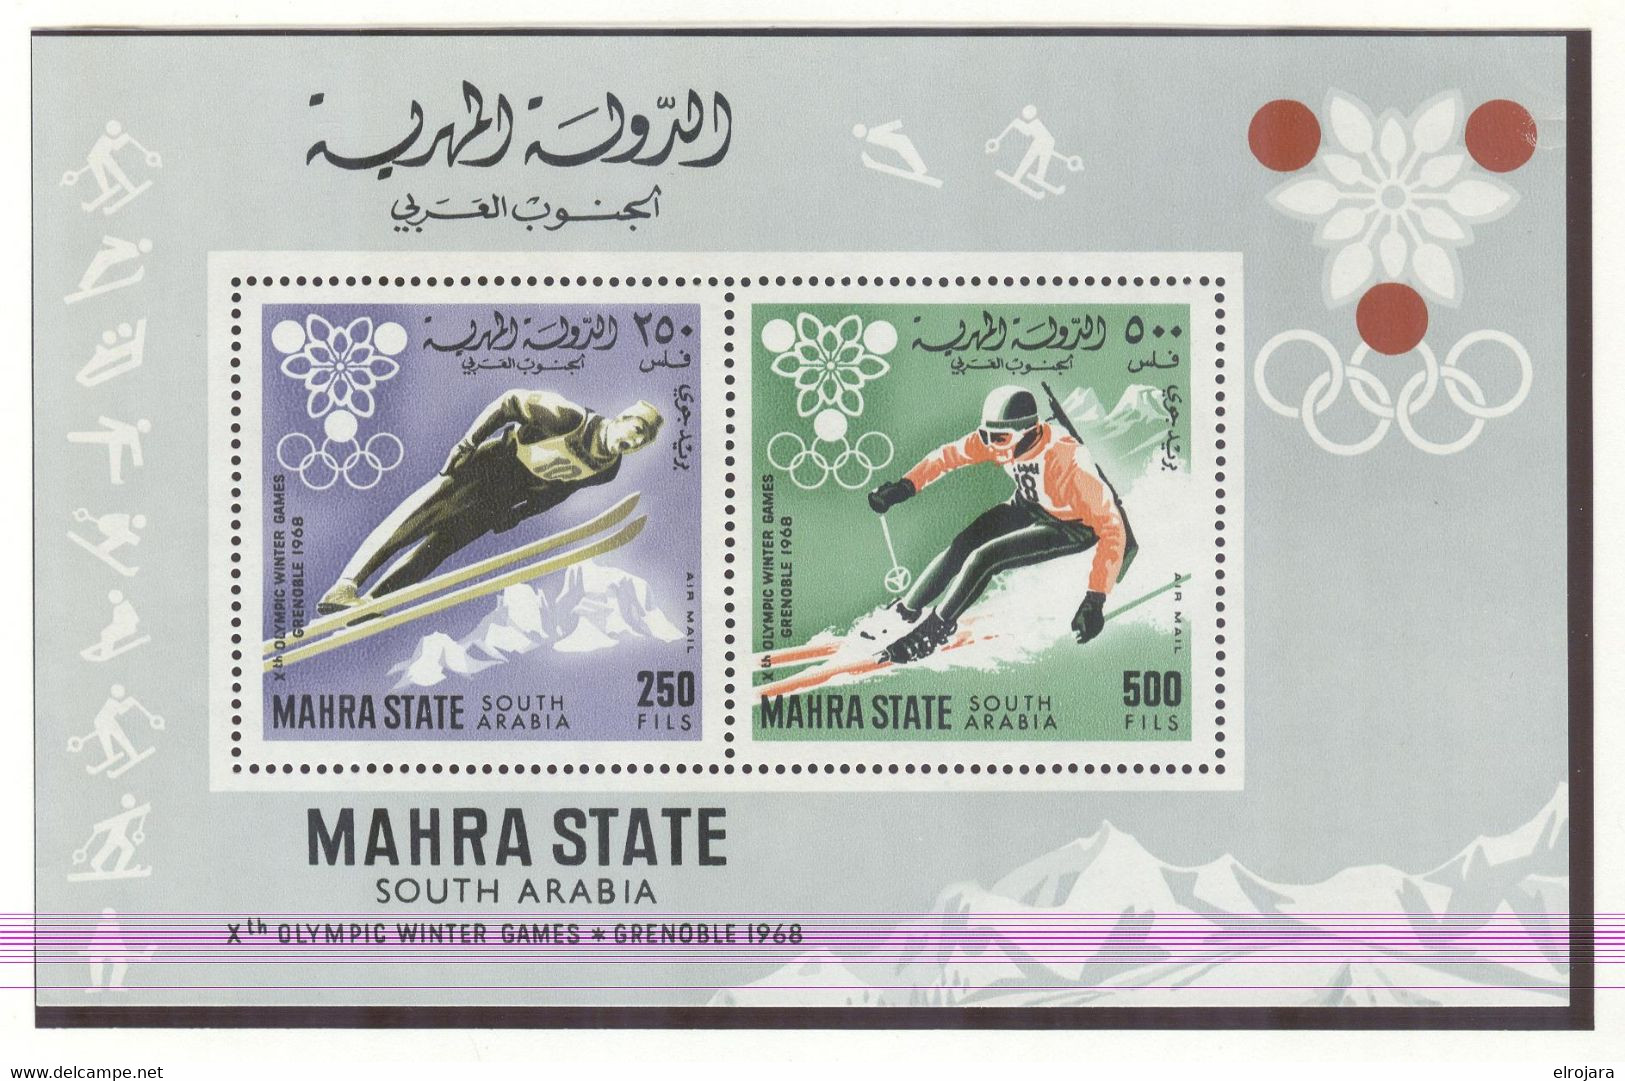 MAHRA STATE Perforated Set And Block Mint Without Hinge - Winter 1968: Grenoble